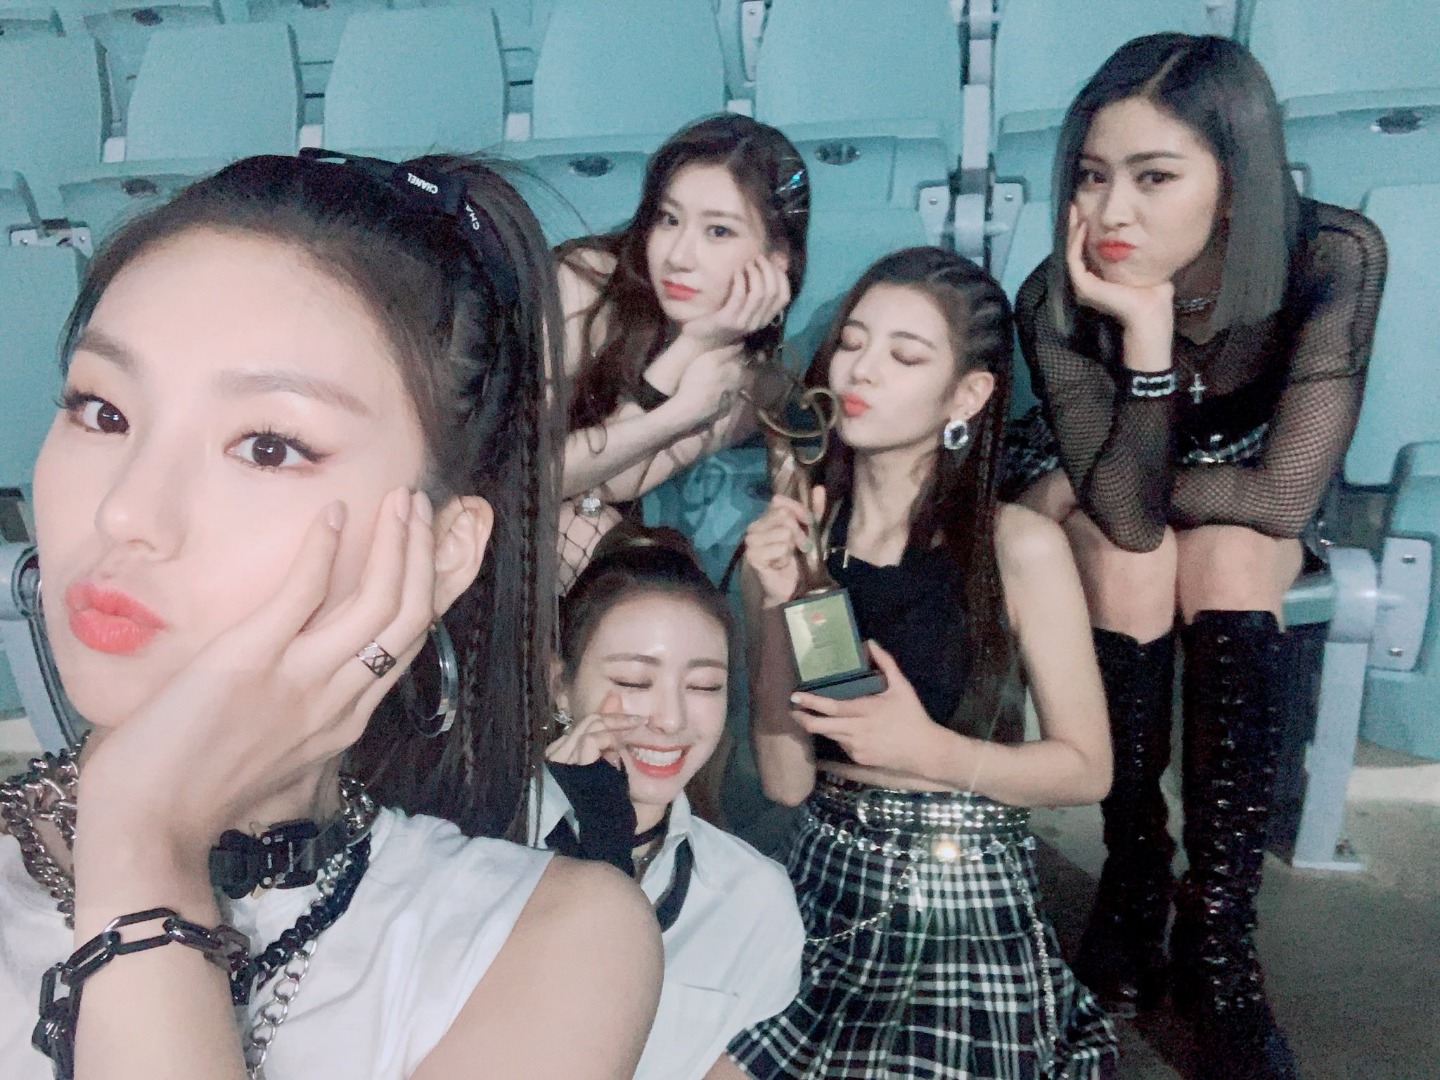 ITZY at Seoul Music Awards 2020